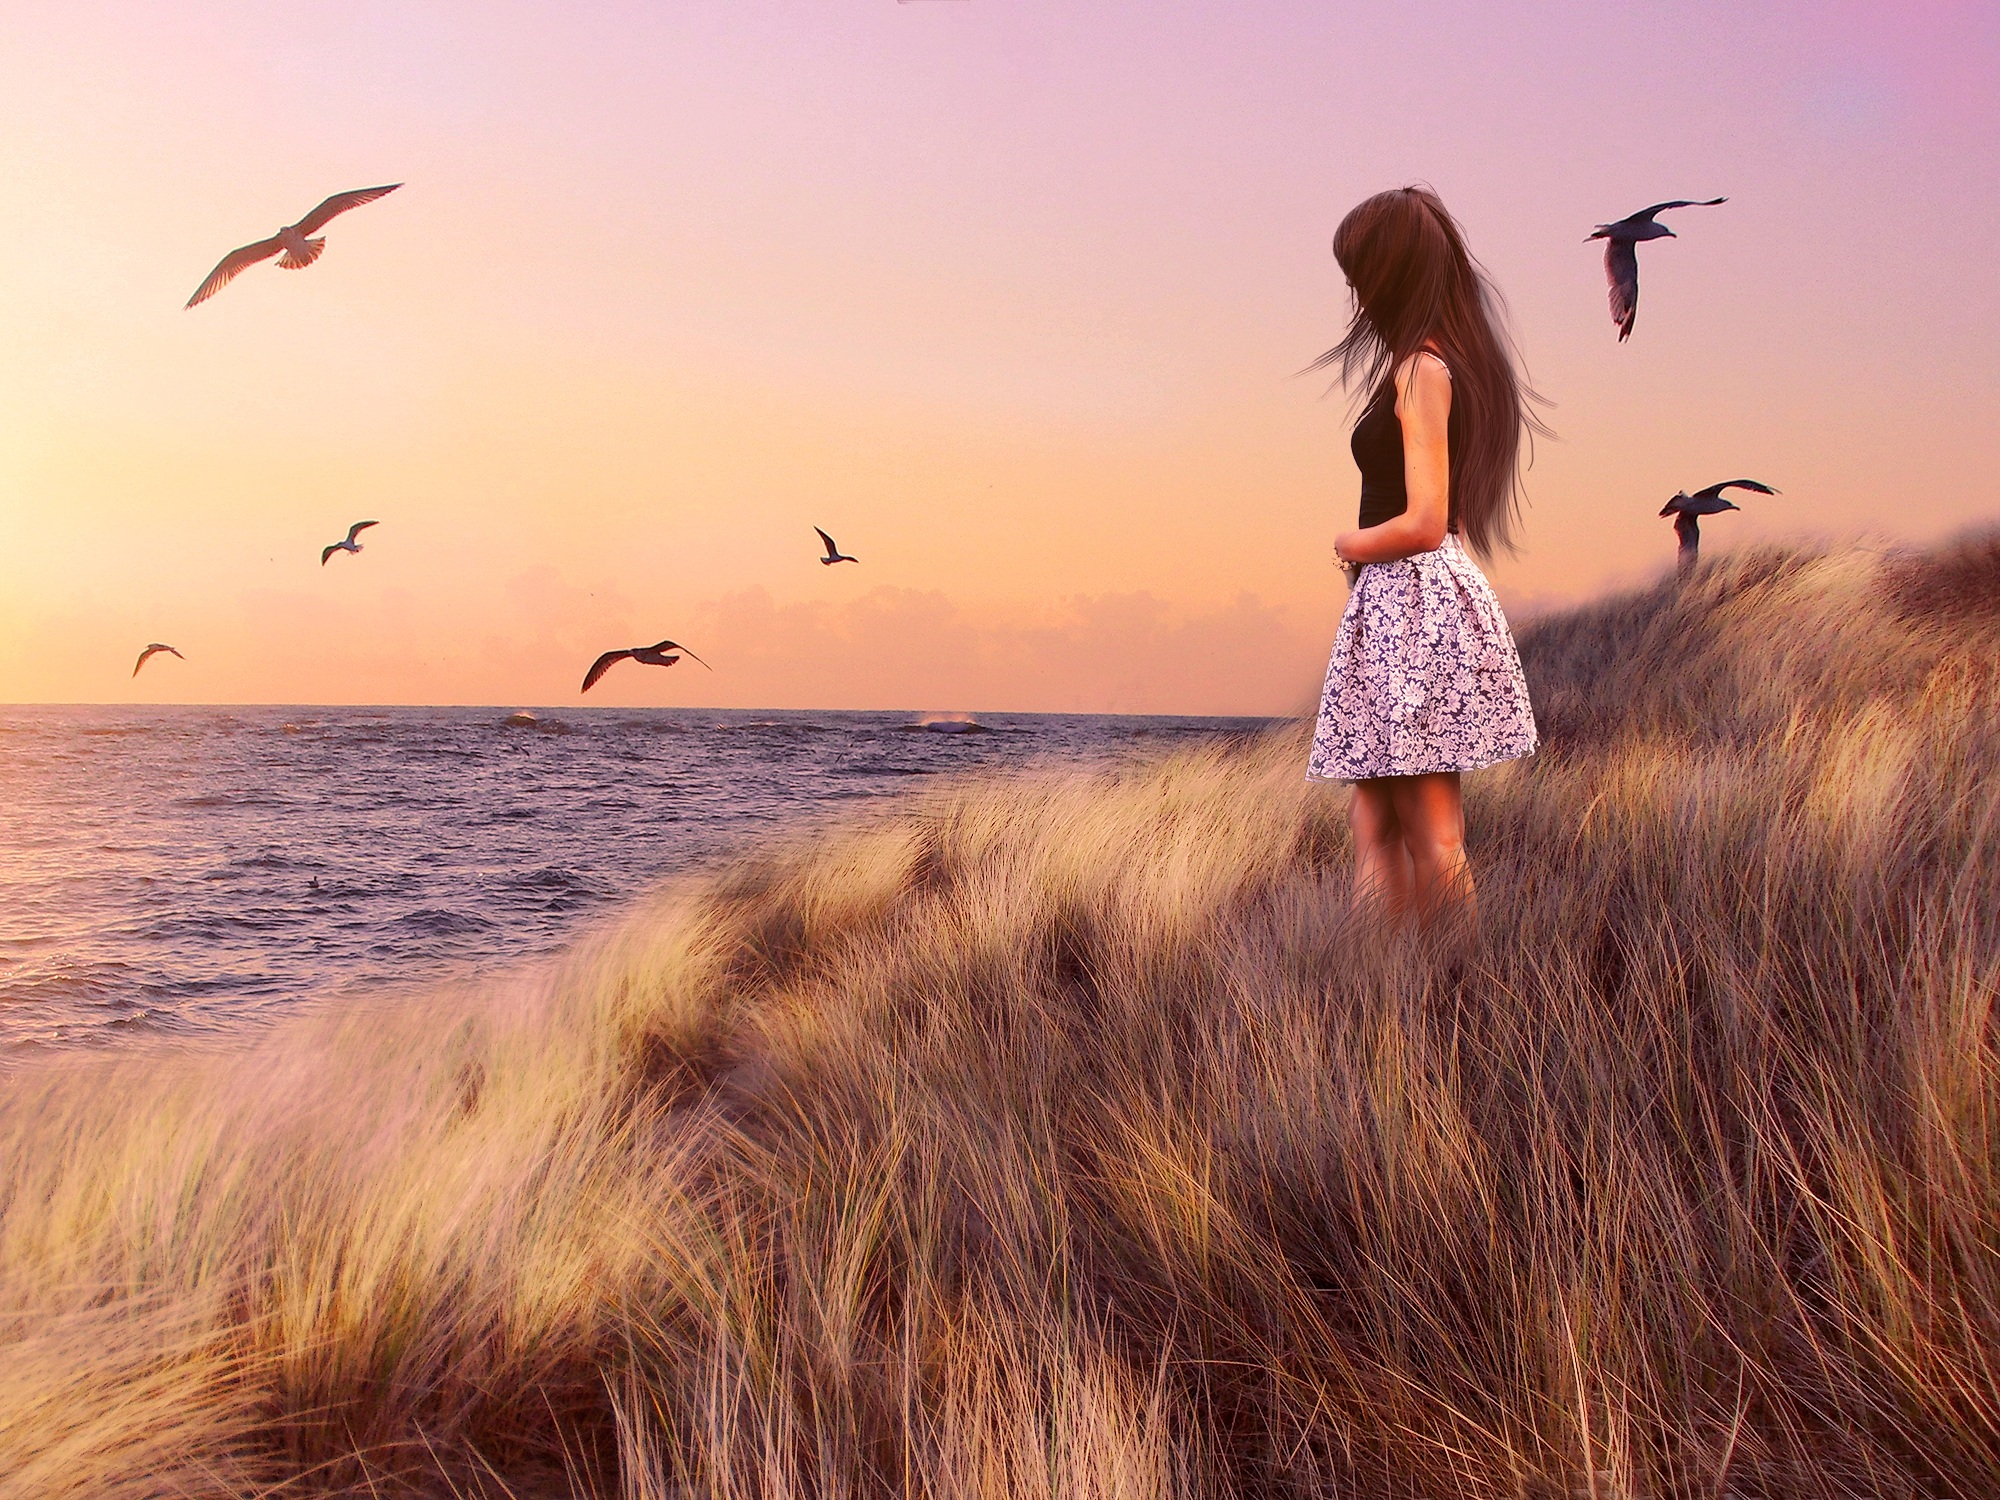 Free photo A girl in a dress standing near the shore where the seagulls fly